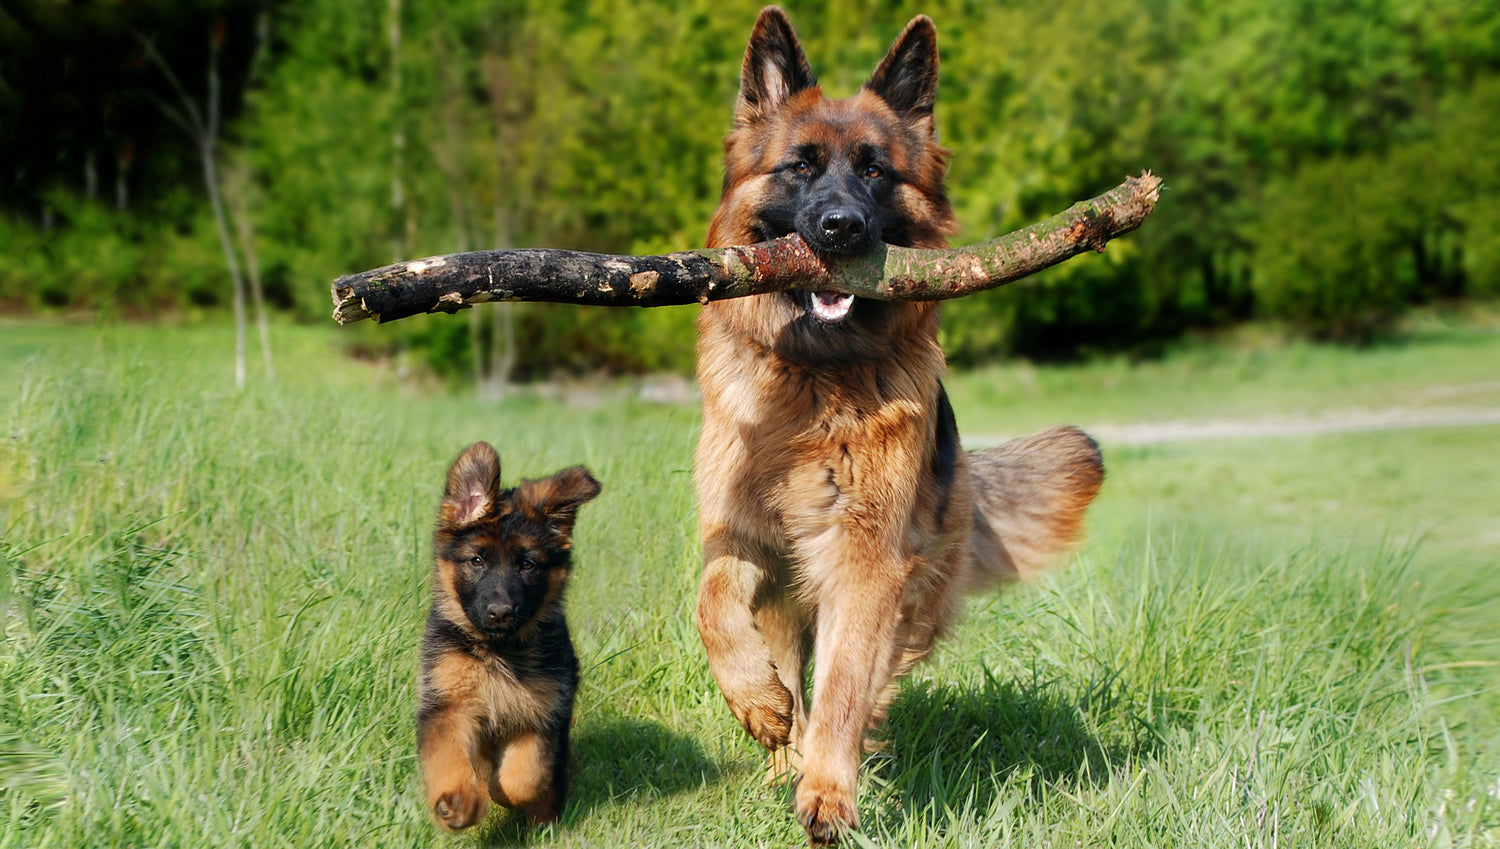 German Shepherd puppy and adult dog running in grass with adult dog carrying a large branch